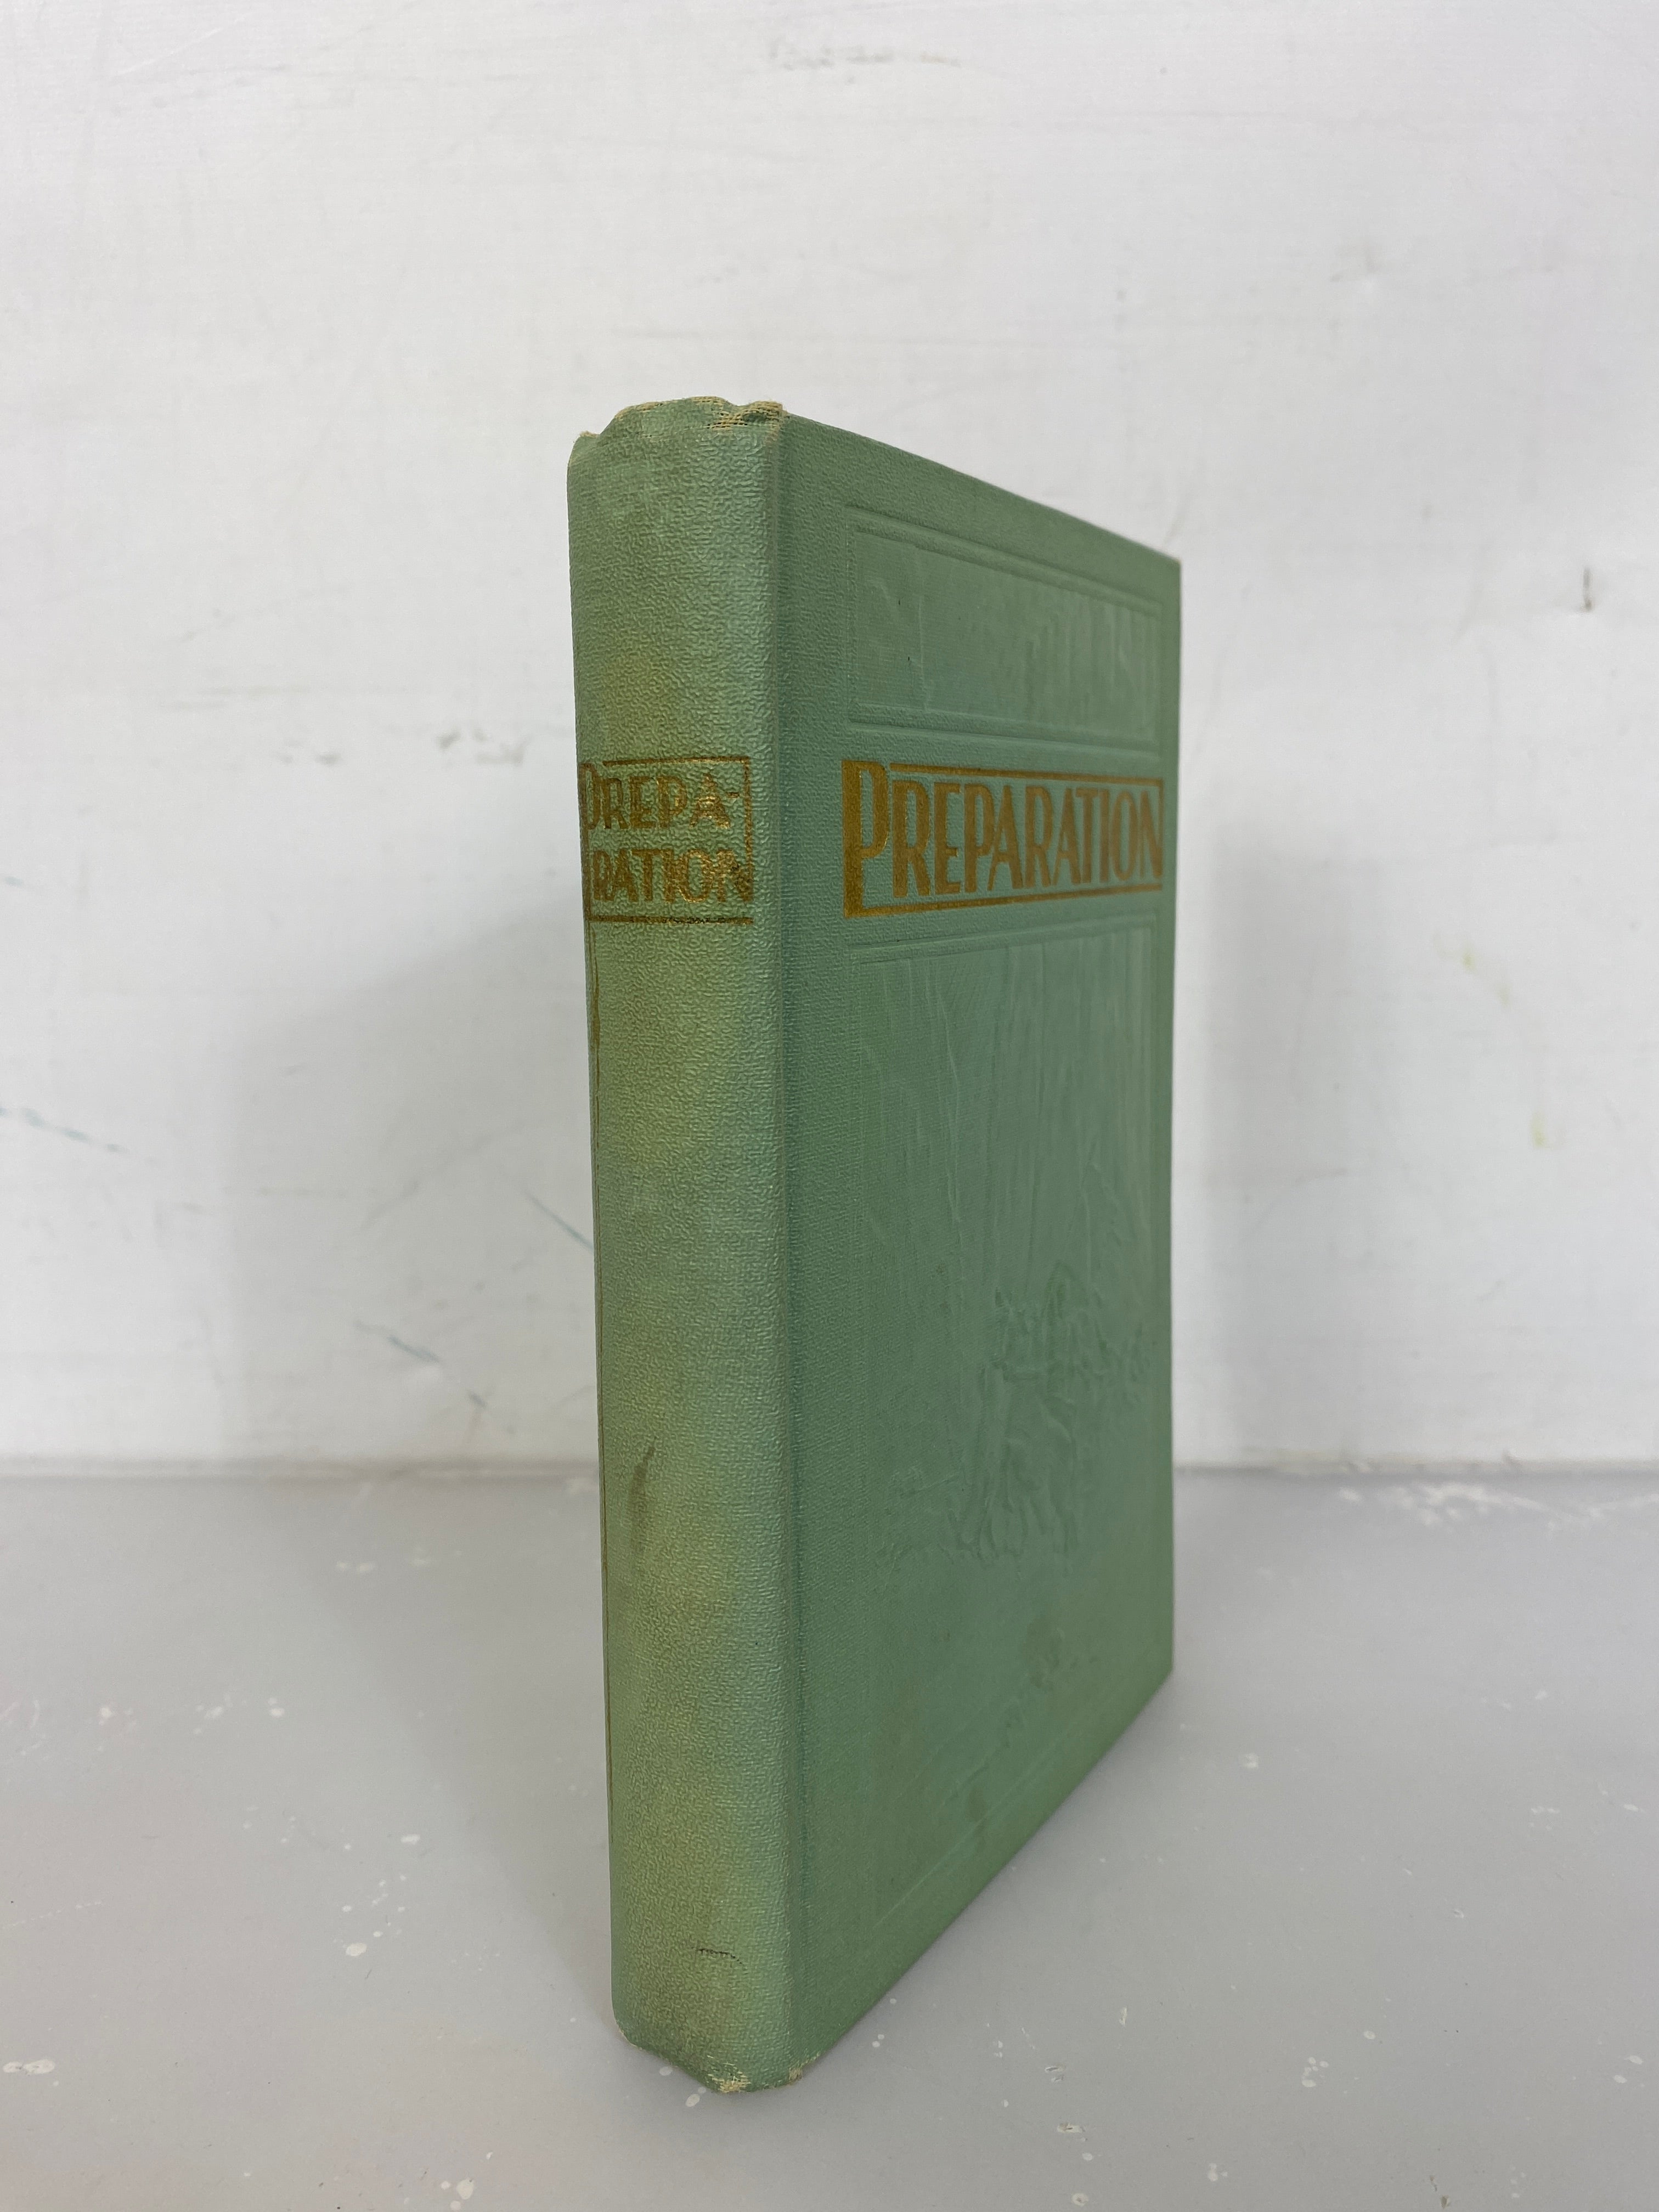 Vintage Watch Tower Preparation J.F. Rutherford 1933 First Printing HC